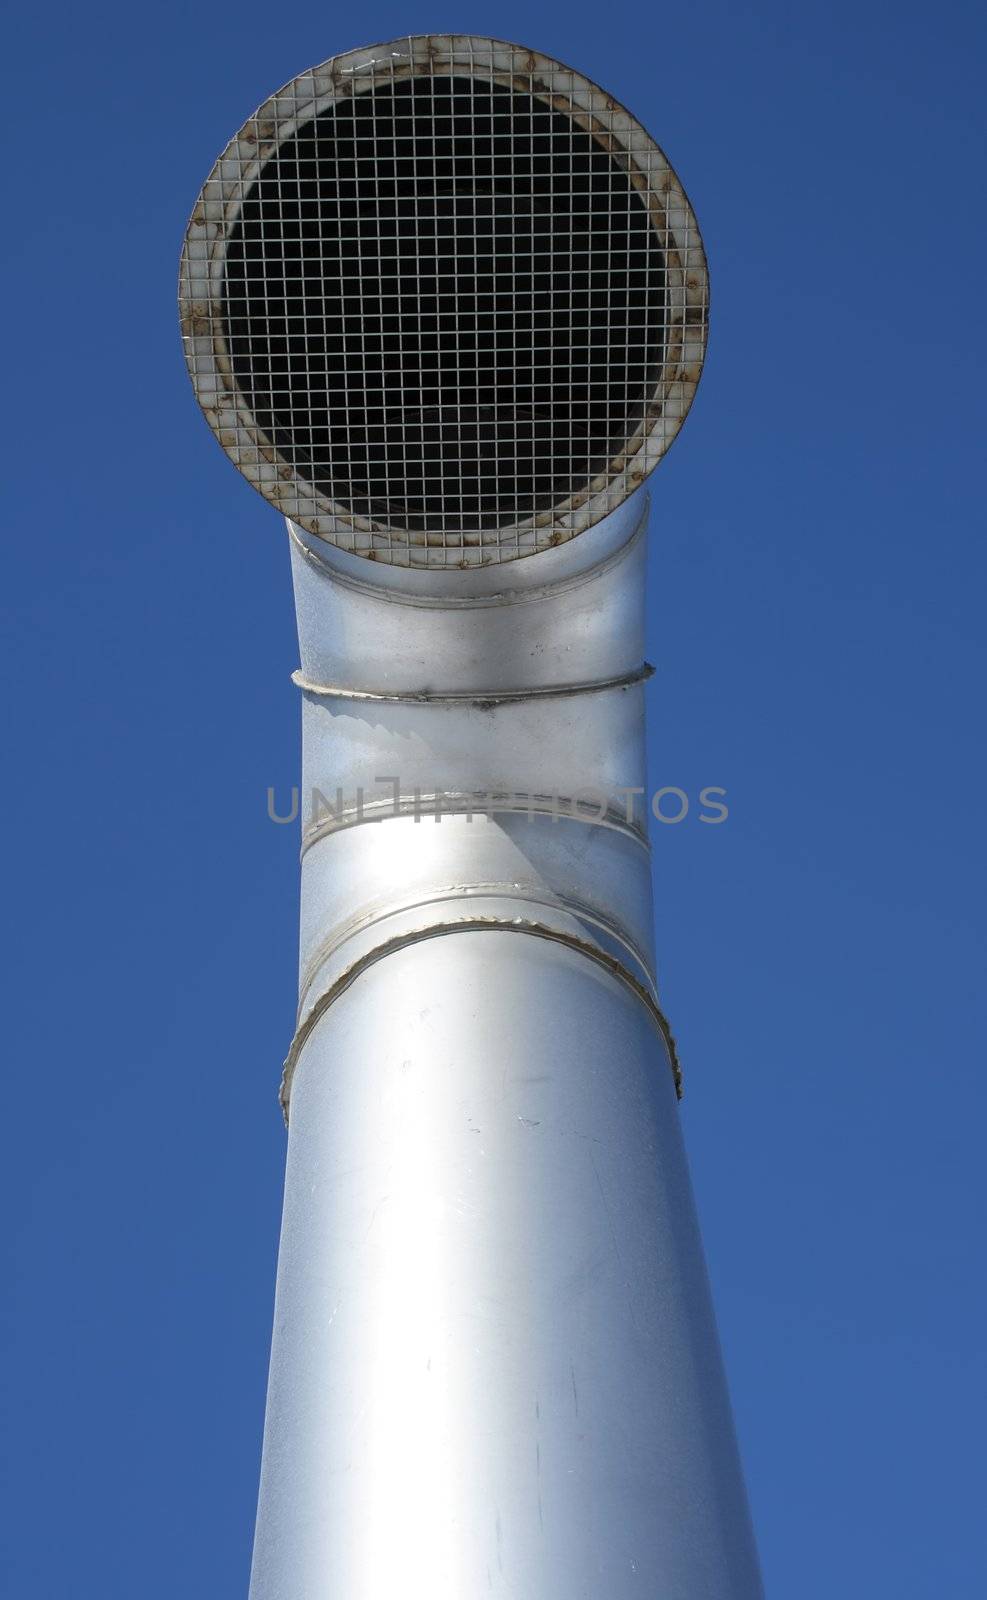 Shiny metallic ventilation pipe with wire mesh on a blue sky background.